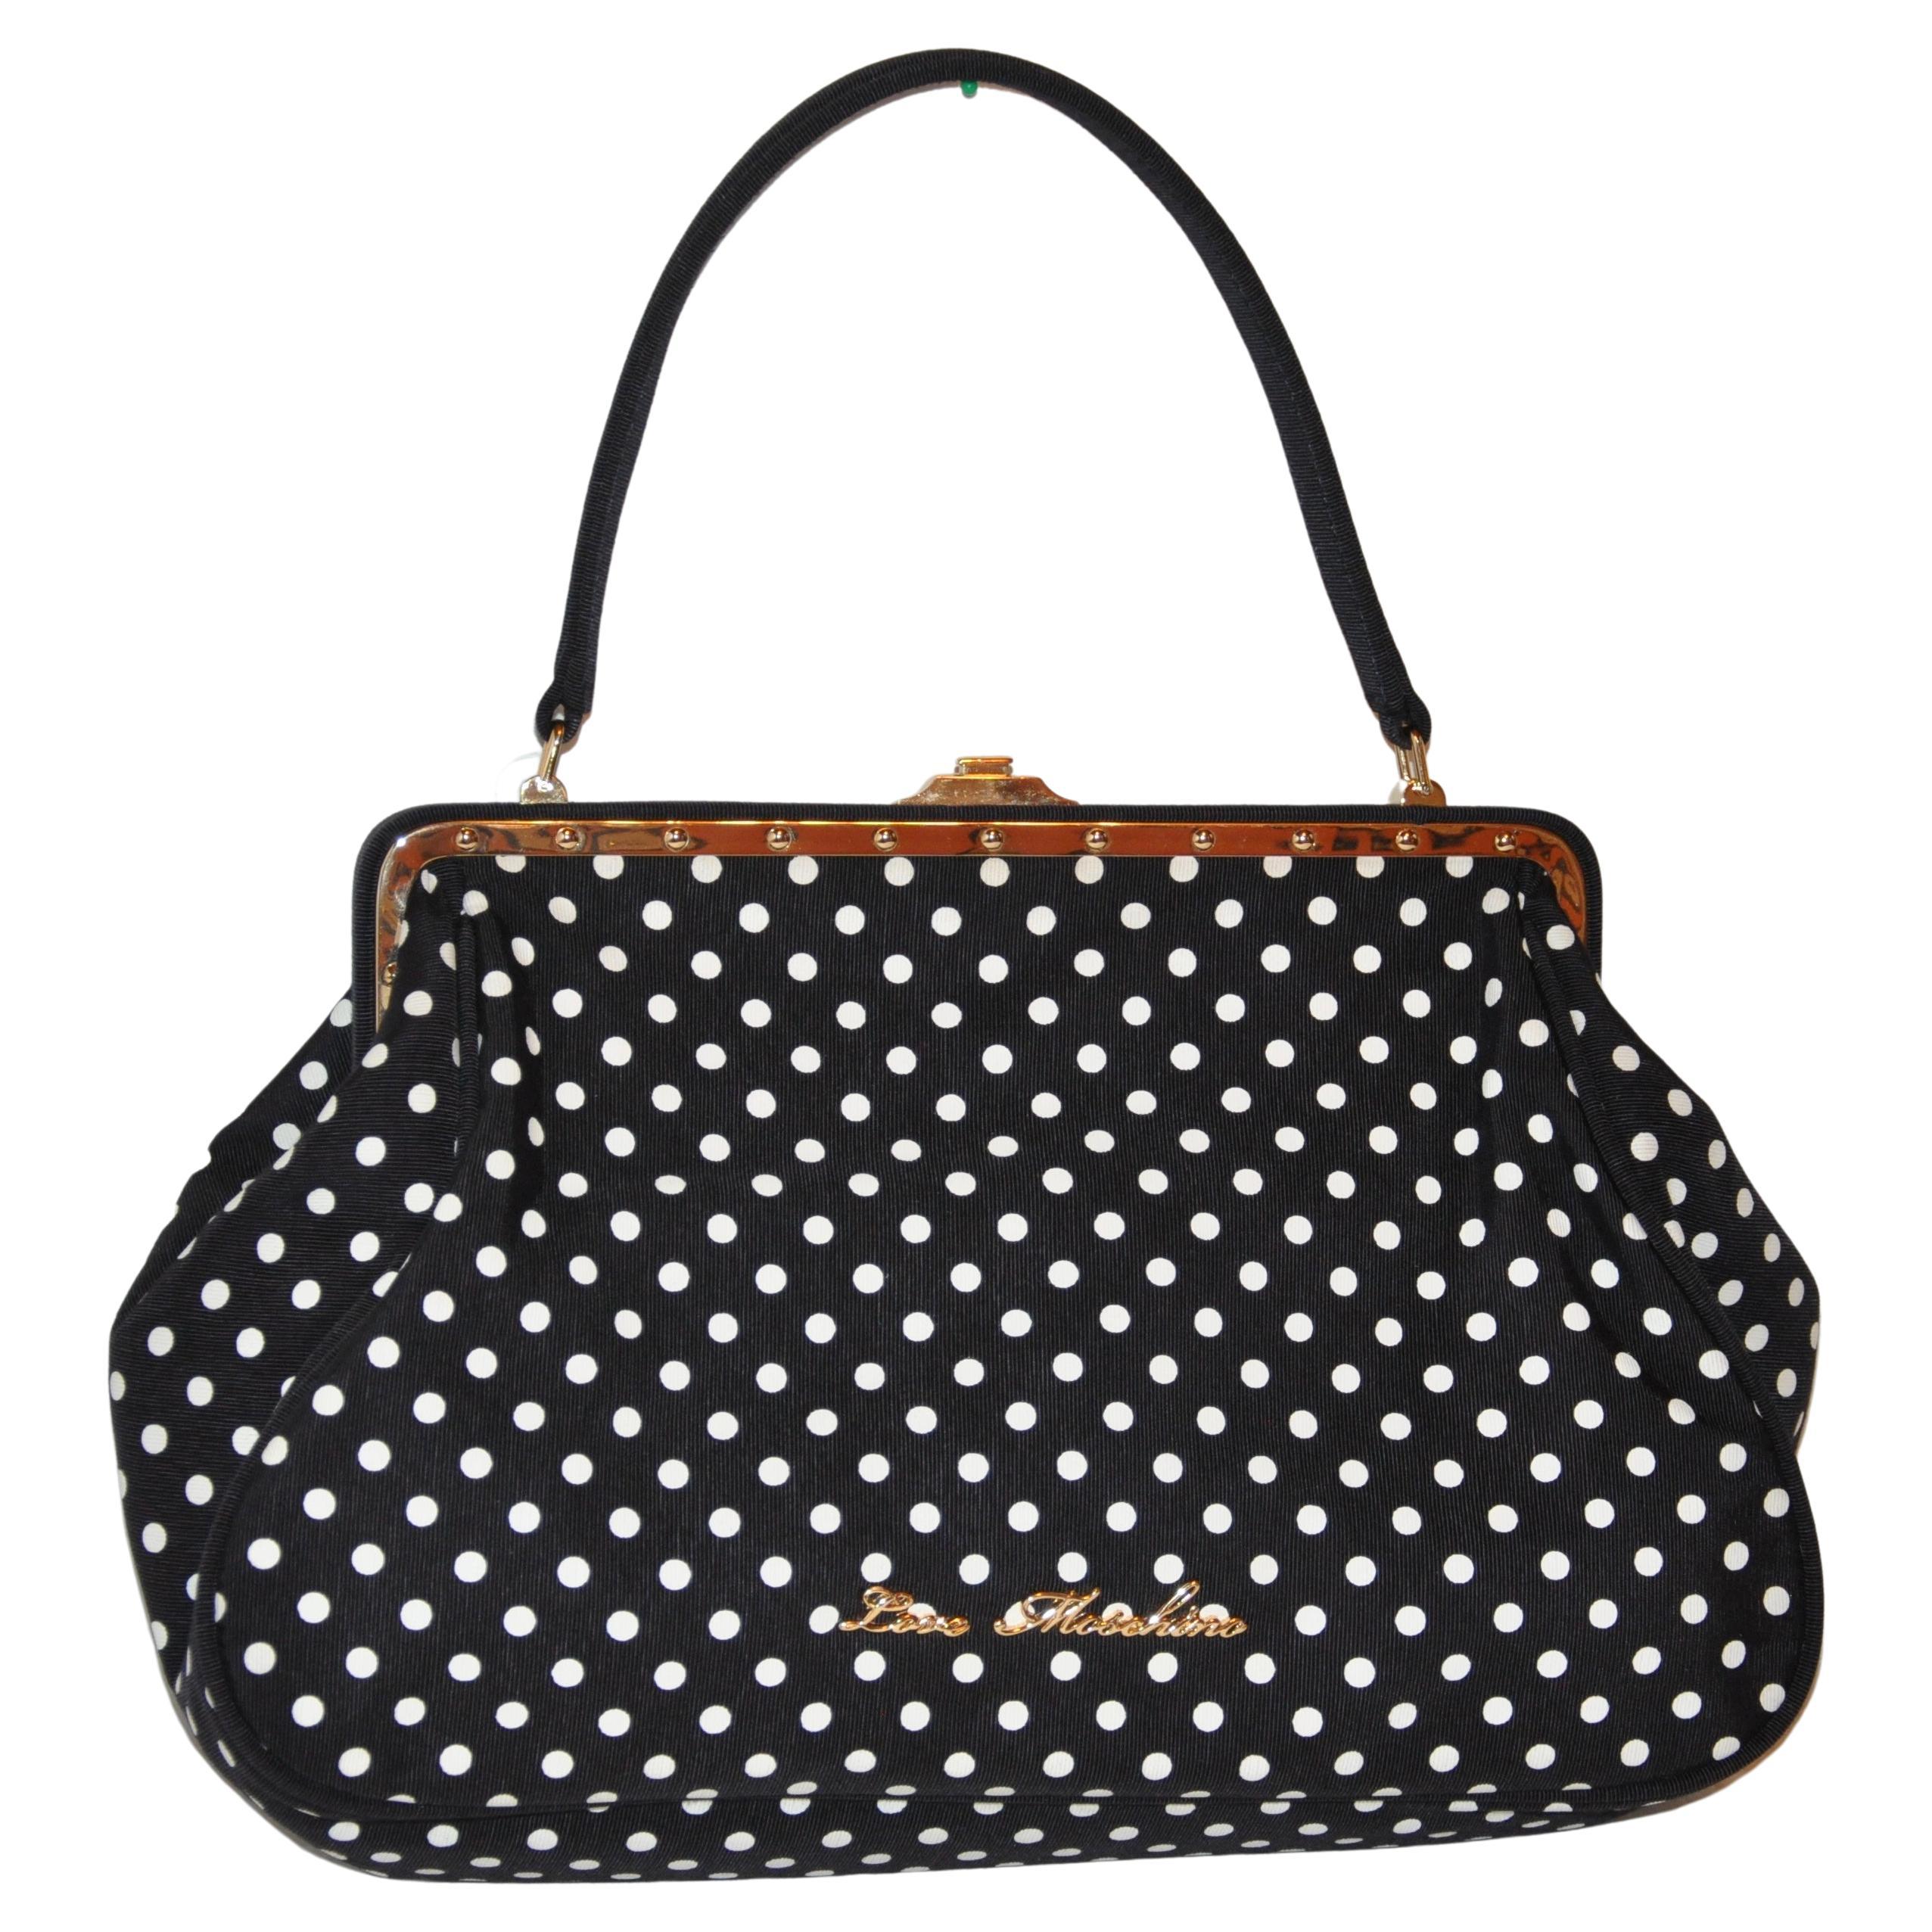 Moschino Black with White Polka Dot and Gilded Gold Hardware Accent Handbag